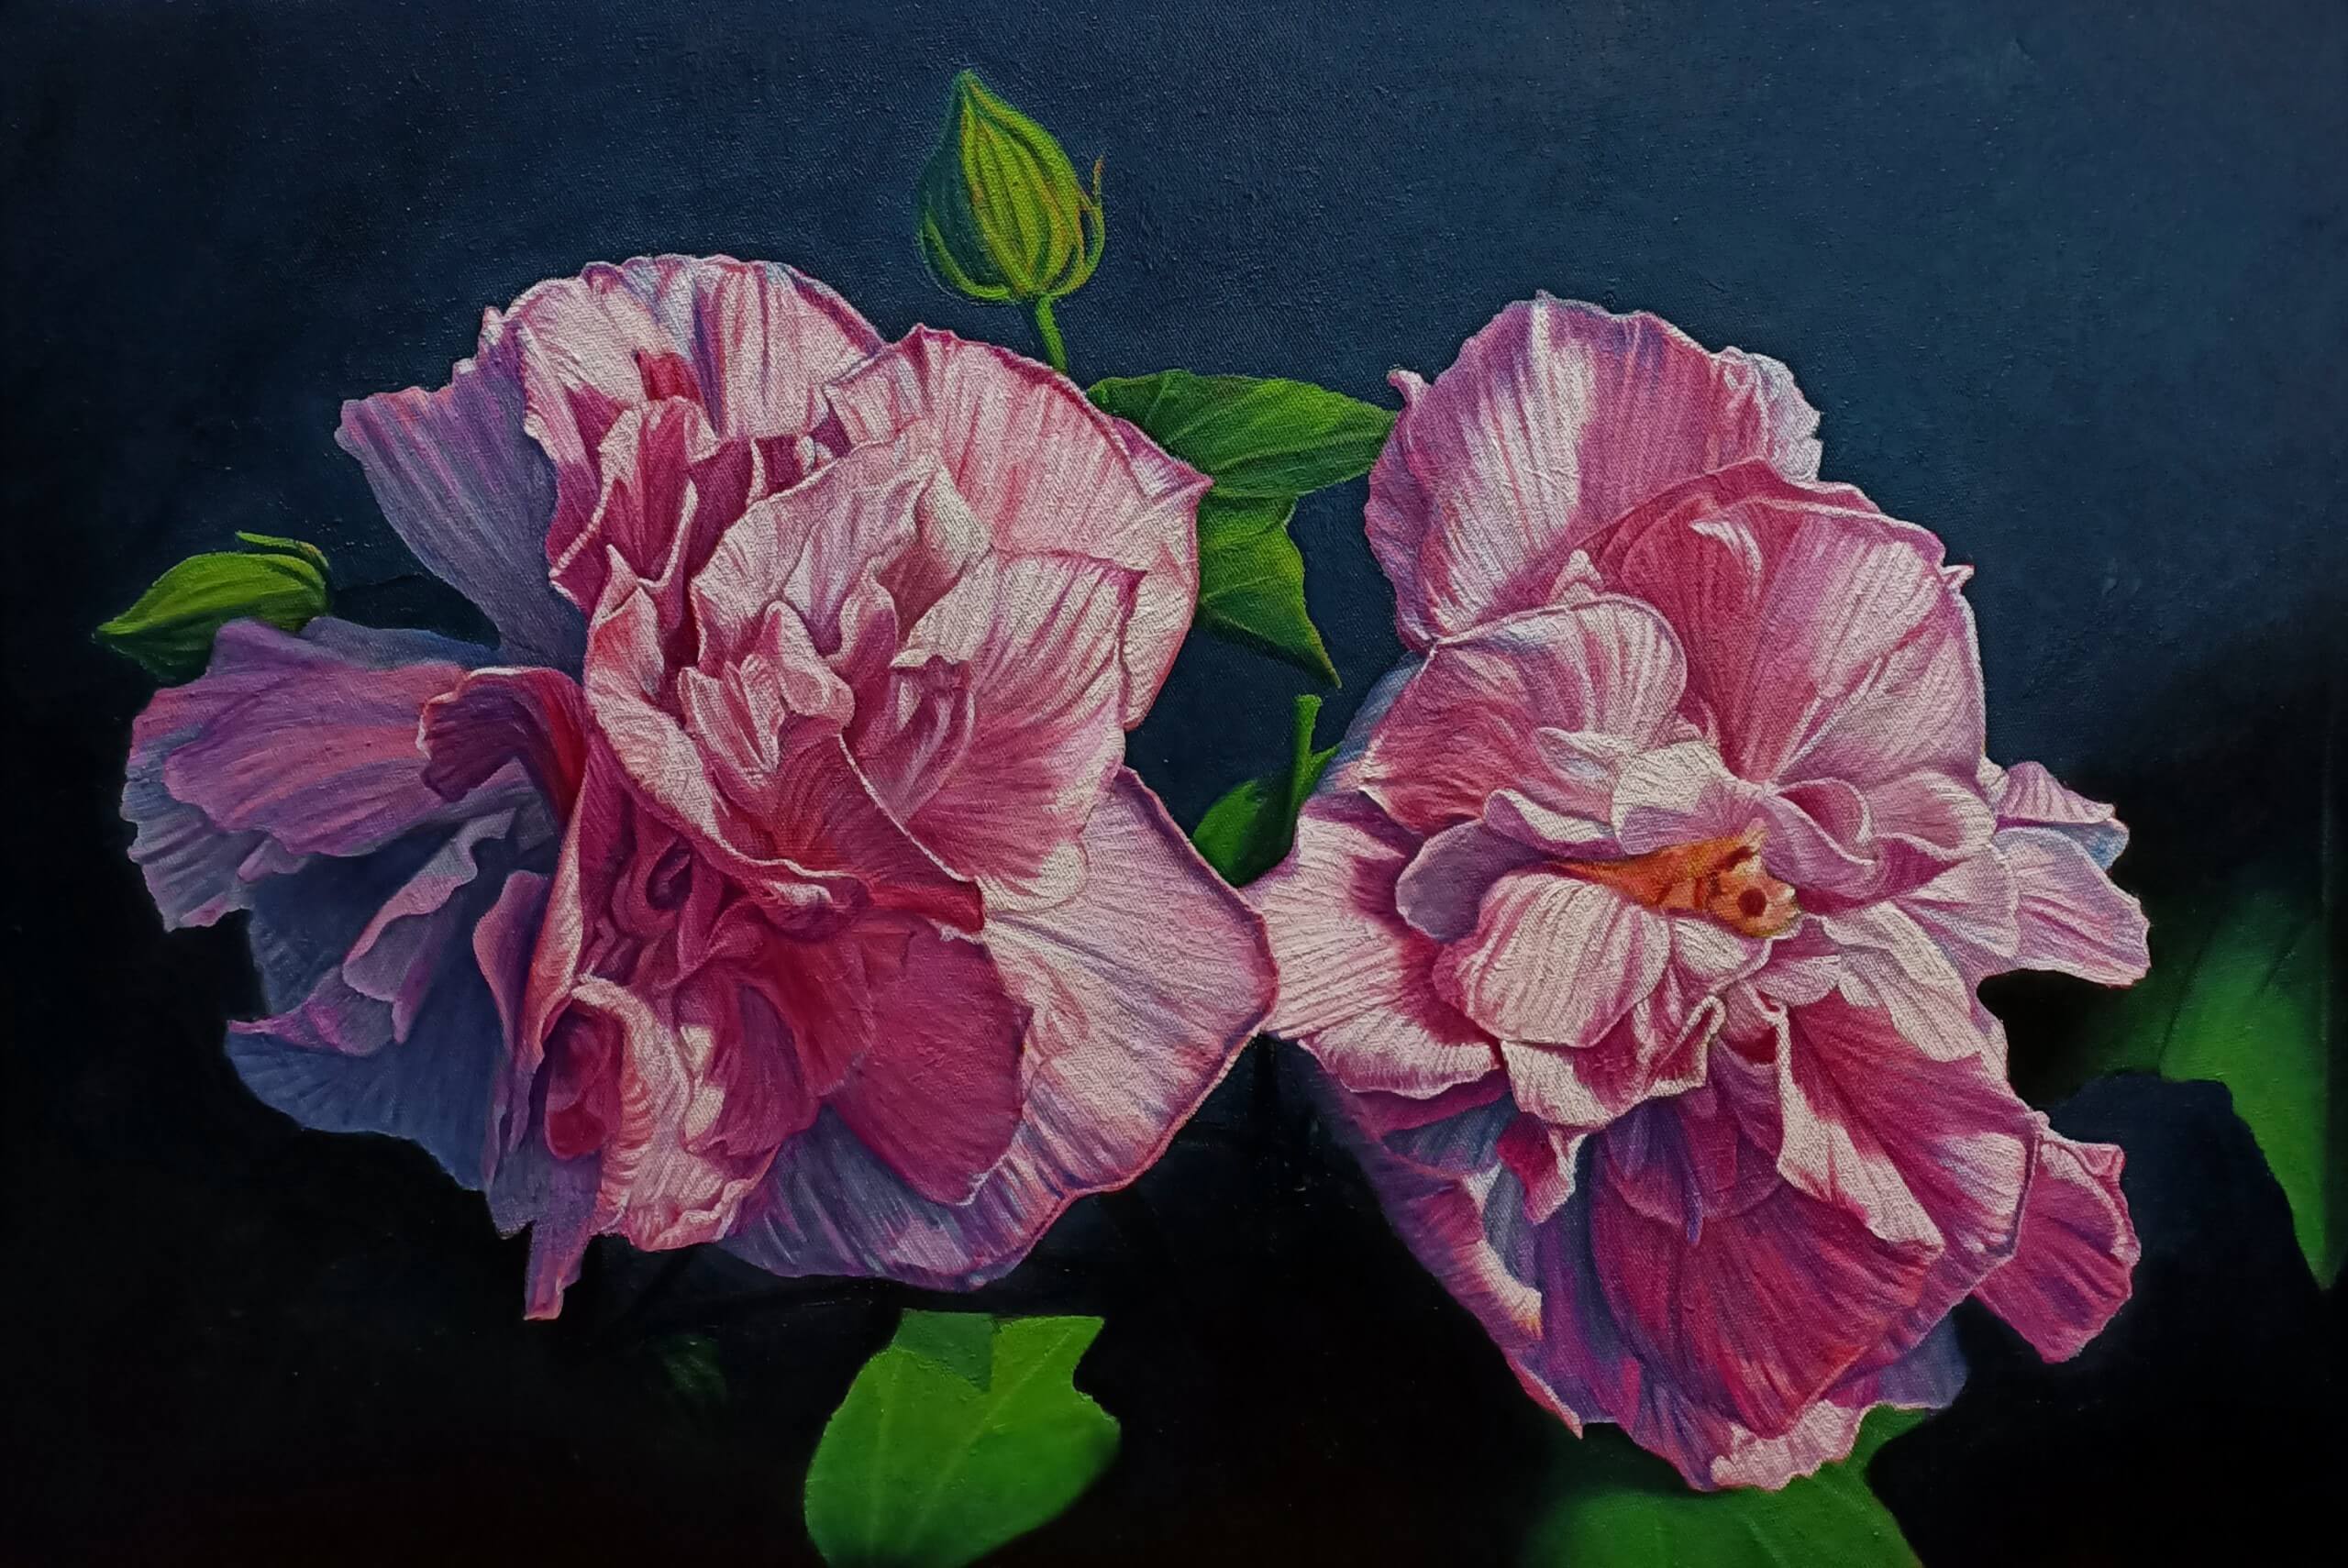 Hibiscus Mutabilis oil painting by artist Nguyen Dinh Duy Quyen